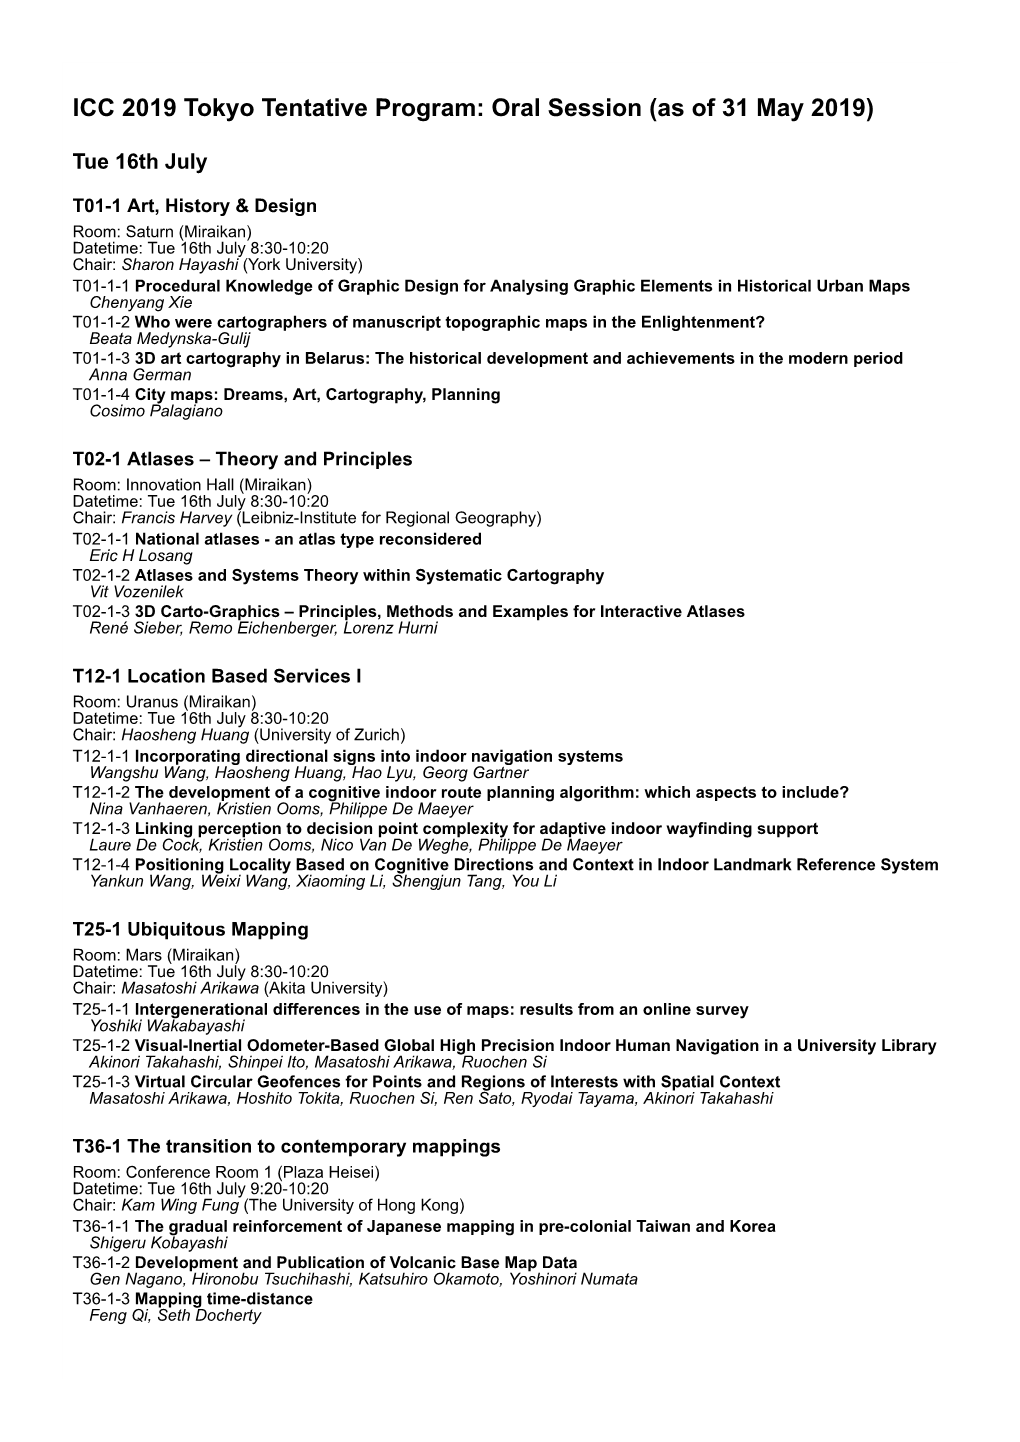 ICC 2019 Tokyo Tentative Program: Oral Session (As of 31 May 2019)